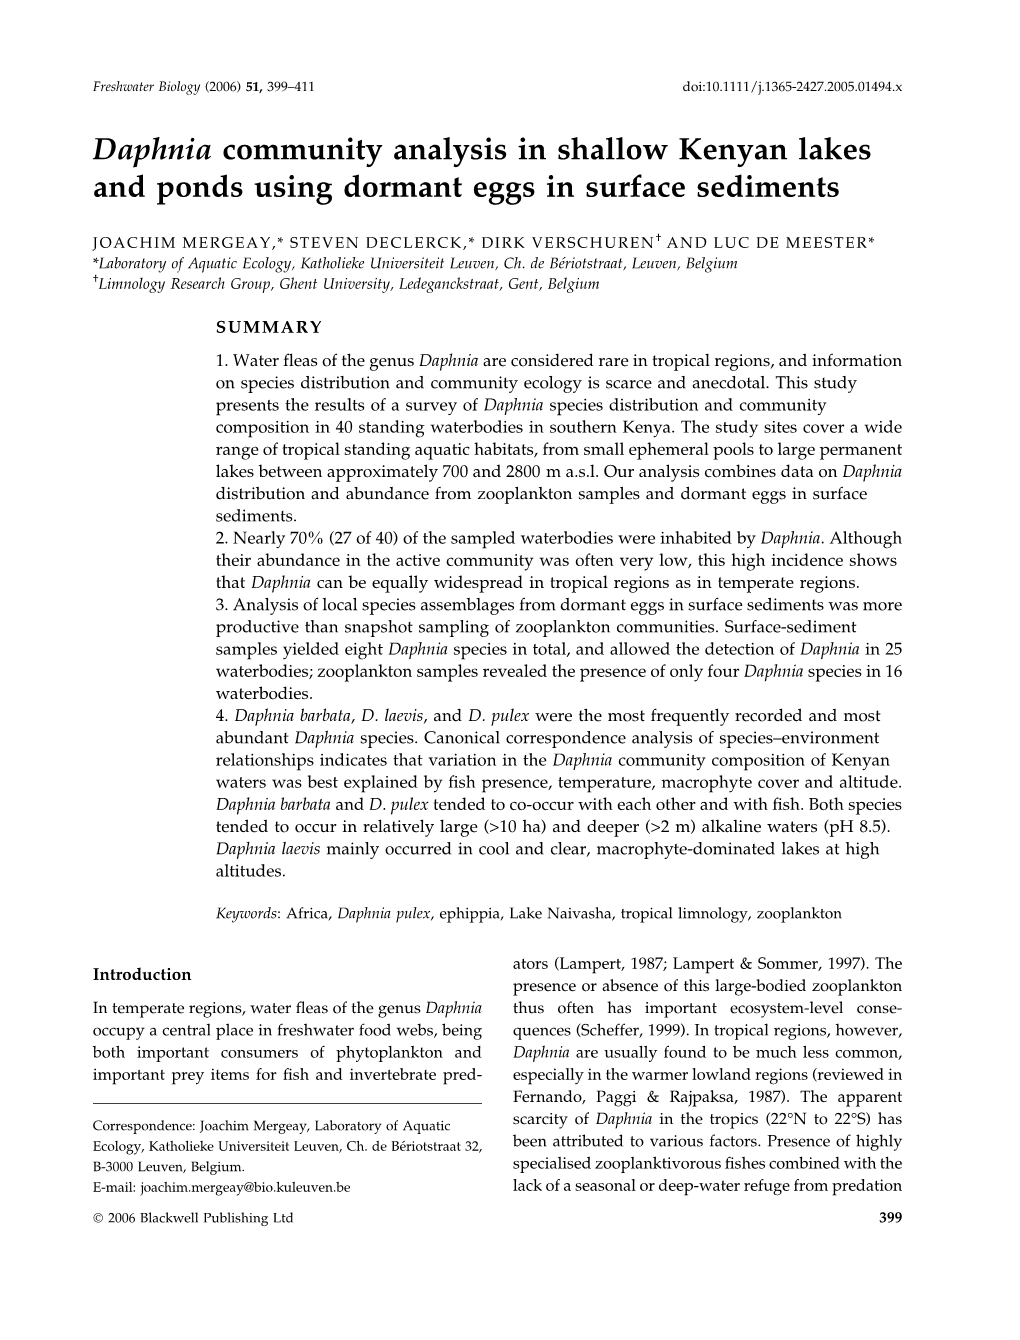 Daphnia Community Analysis in Shallow Kenyan Lakes and Ponds Using Dormant Eggs in Surface Sediments